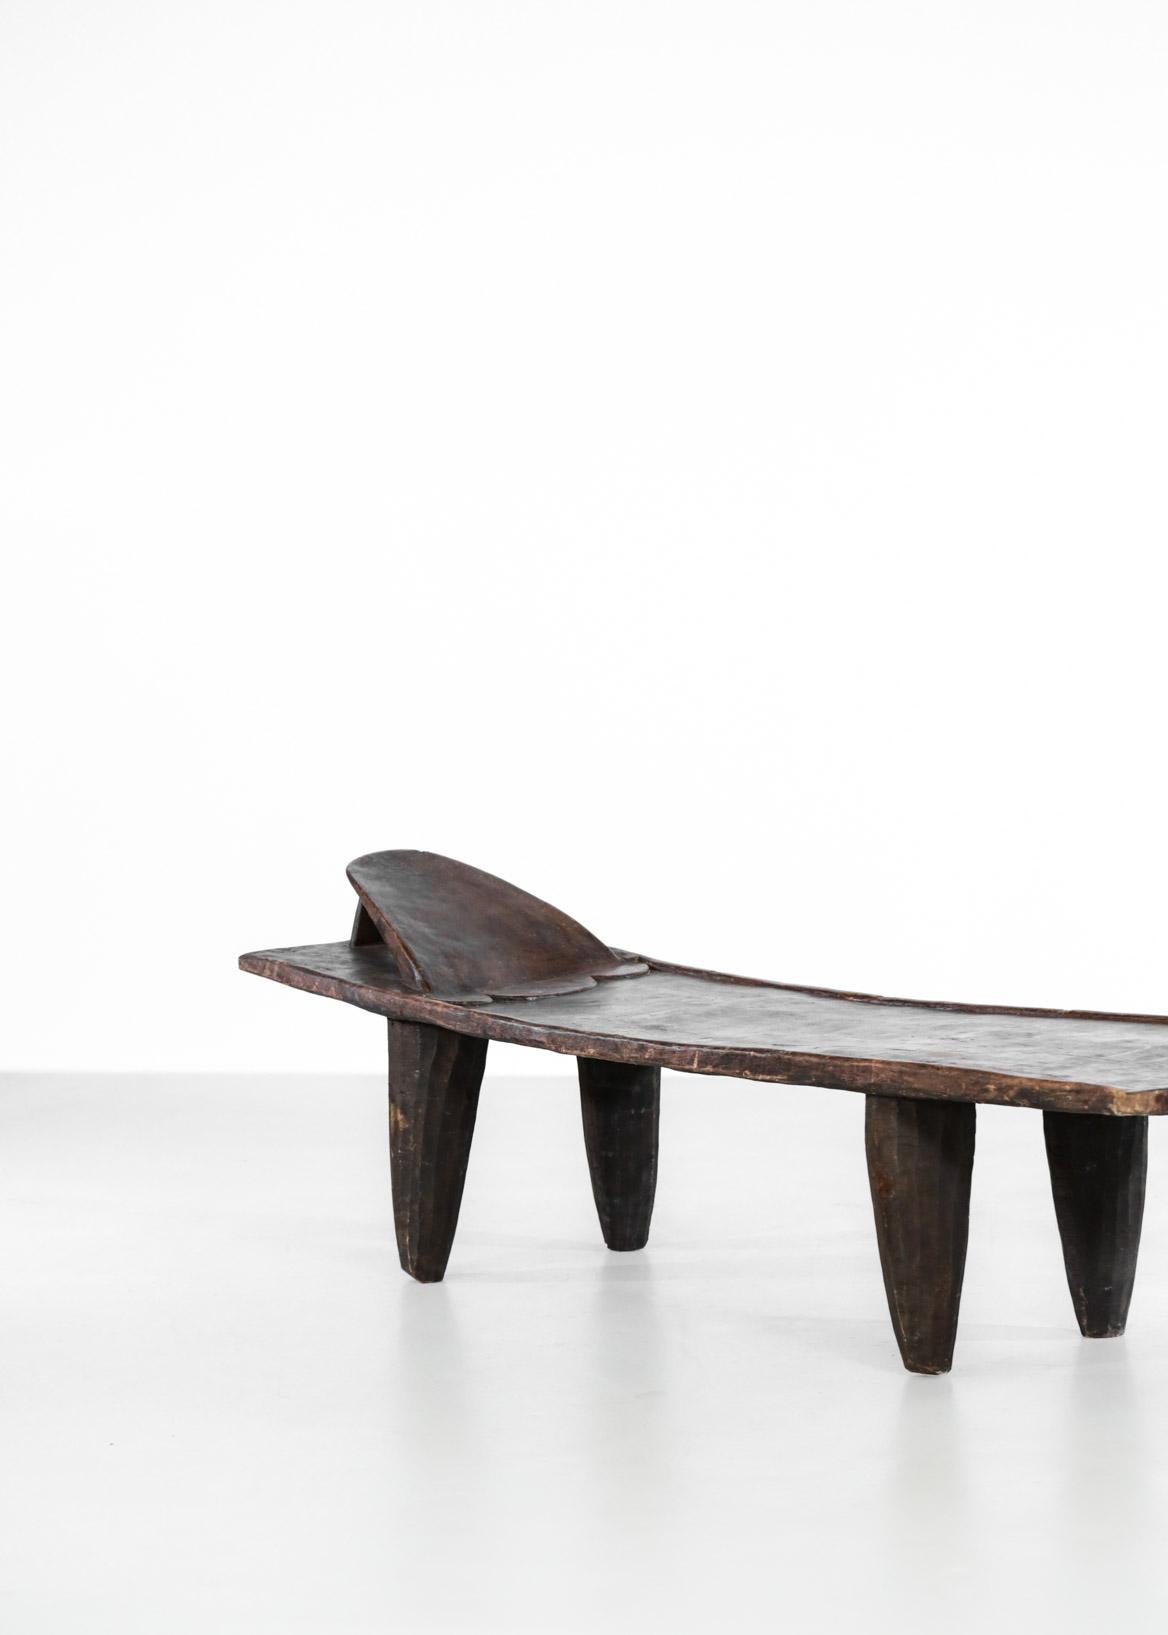 Rare Senoufo African daybed that could be use as a bench or coffee table. Massive piece.